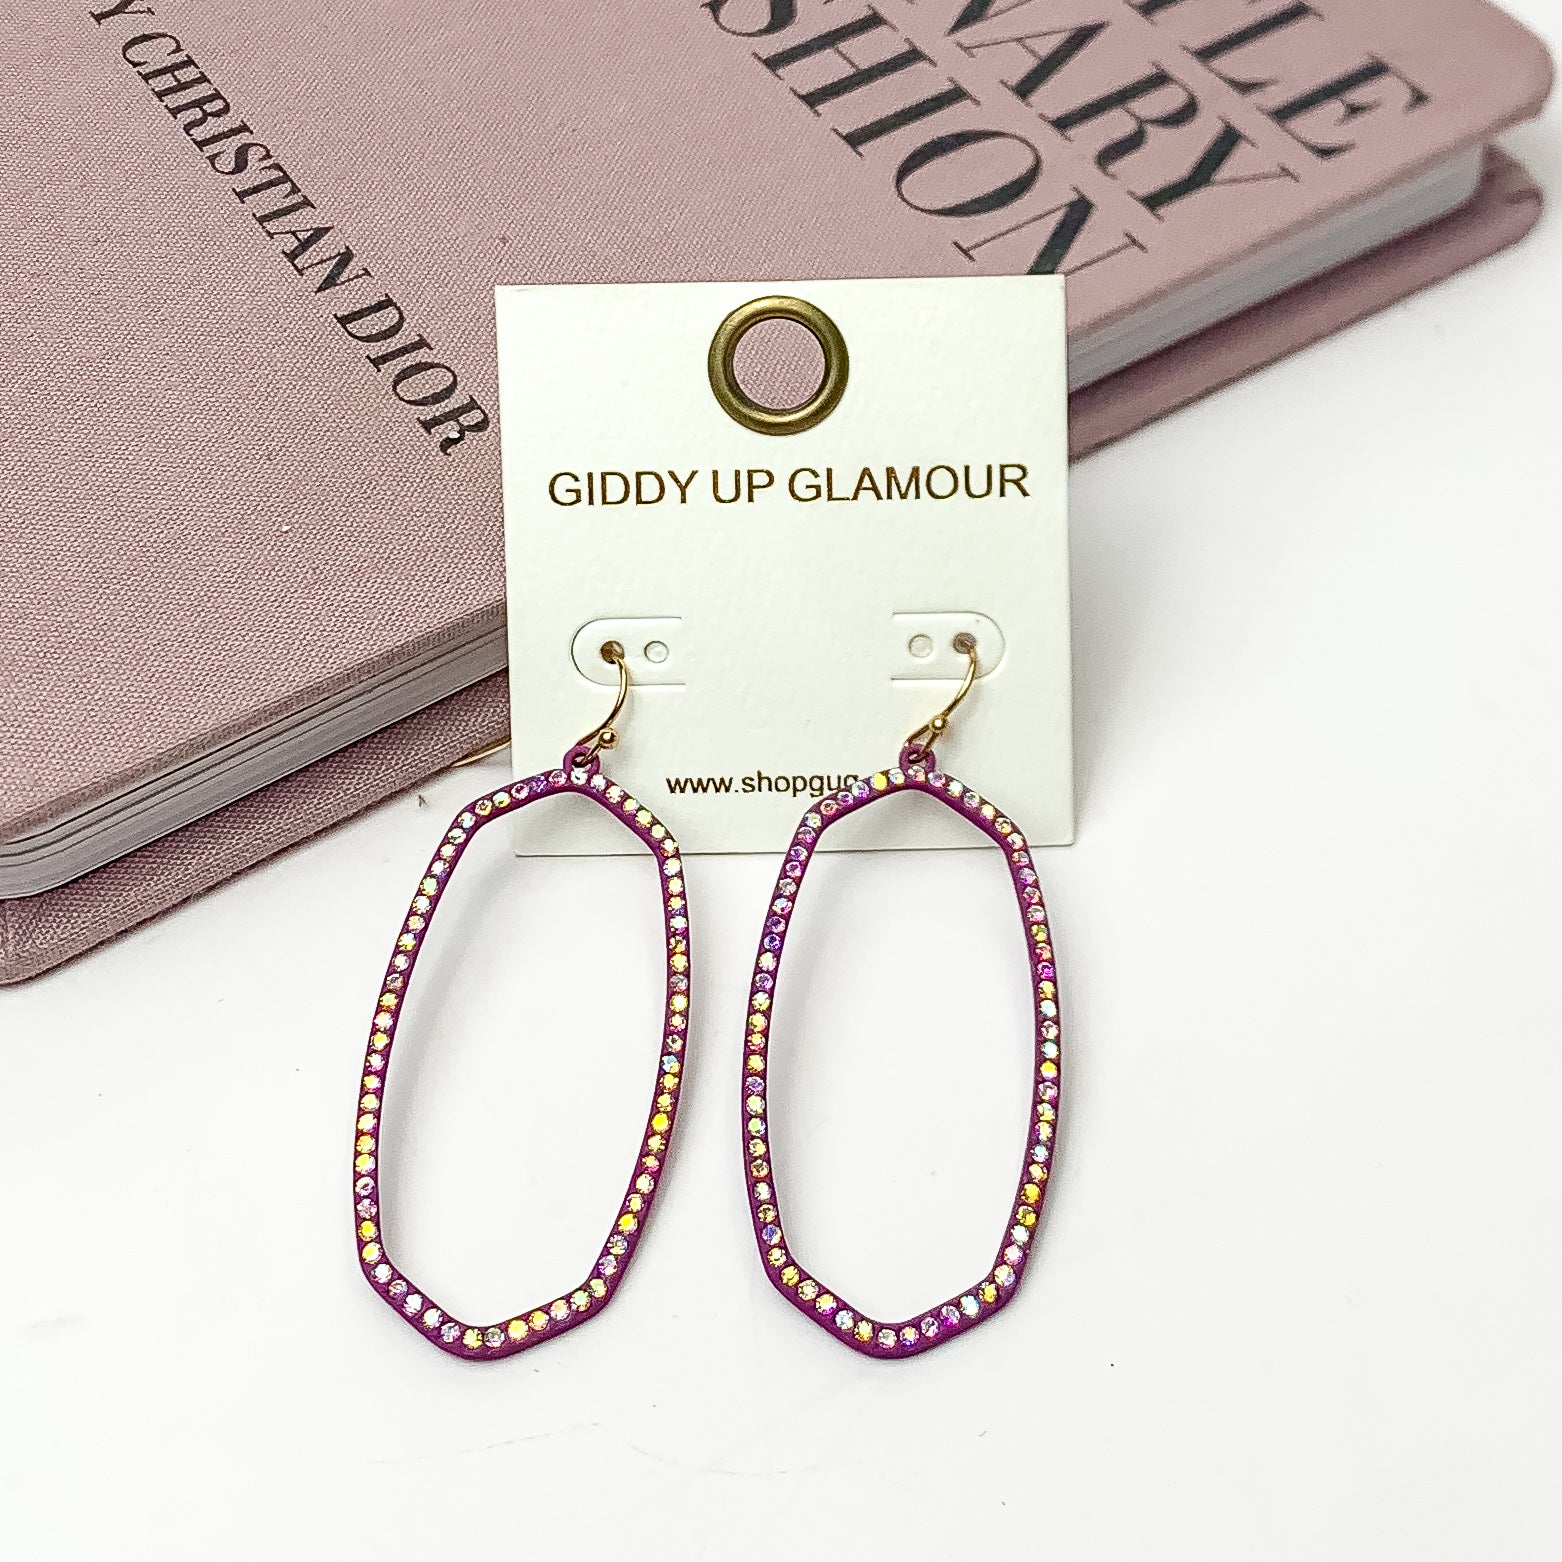 Sparkle Girl Open Oval Earrings in Purple. These earrings are pictured laying against a pink book with a white background.